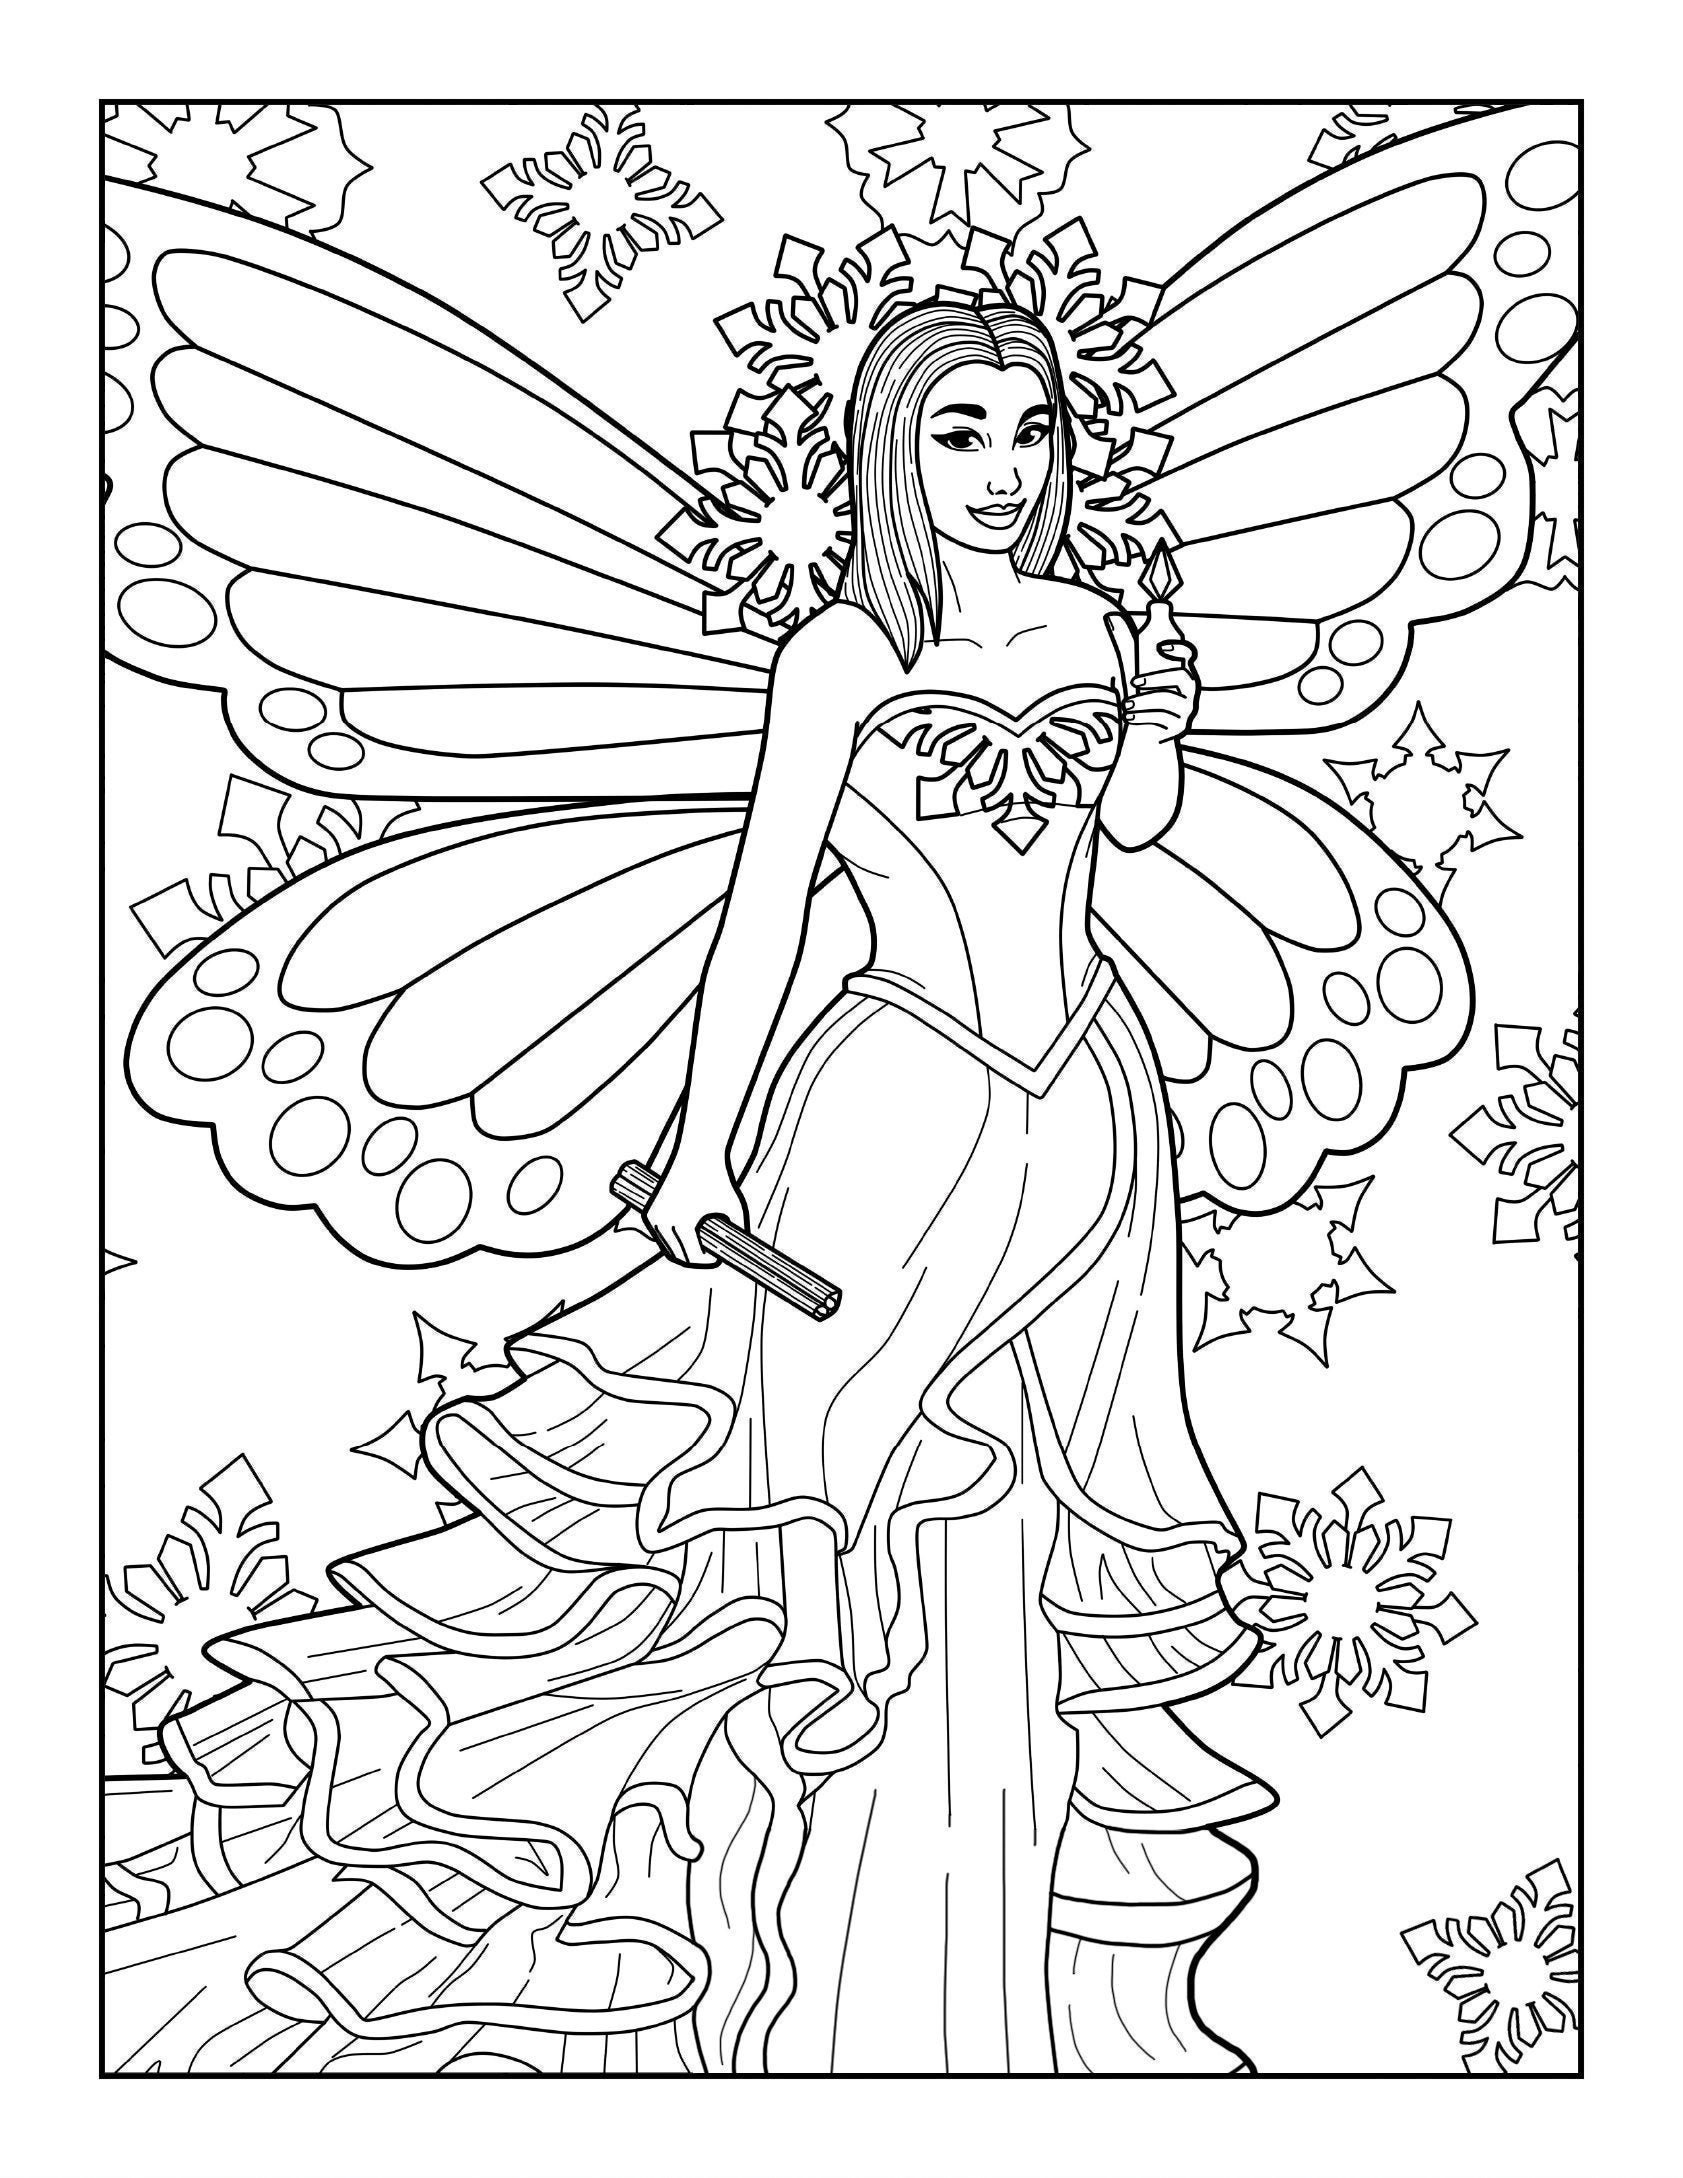 Adult coloring books coloring sheets fairy coloring book coloring book pdf